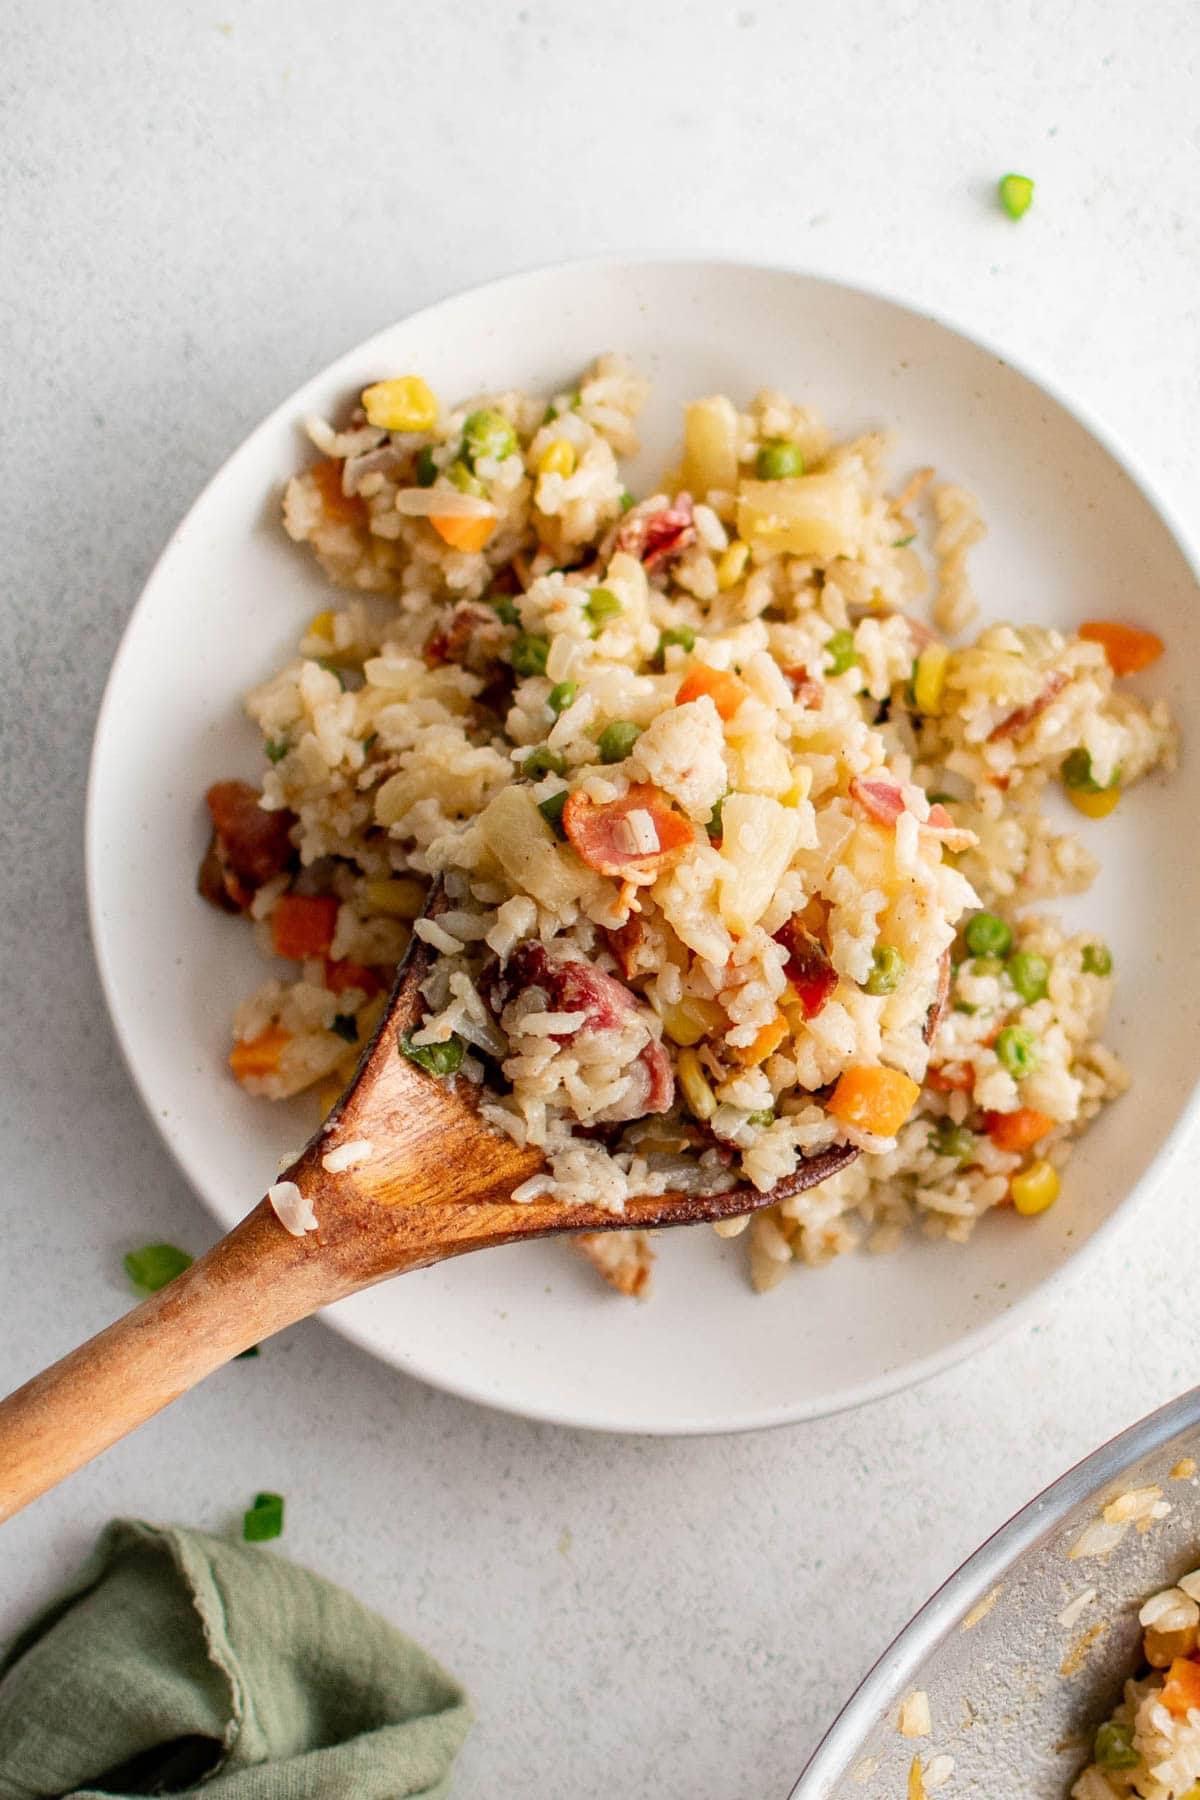 Small white plate with fried rice and a wooden spoon.